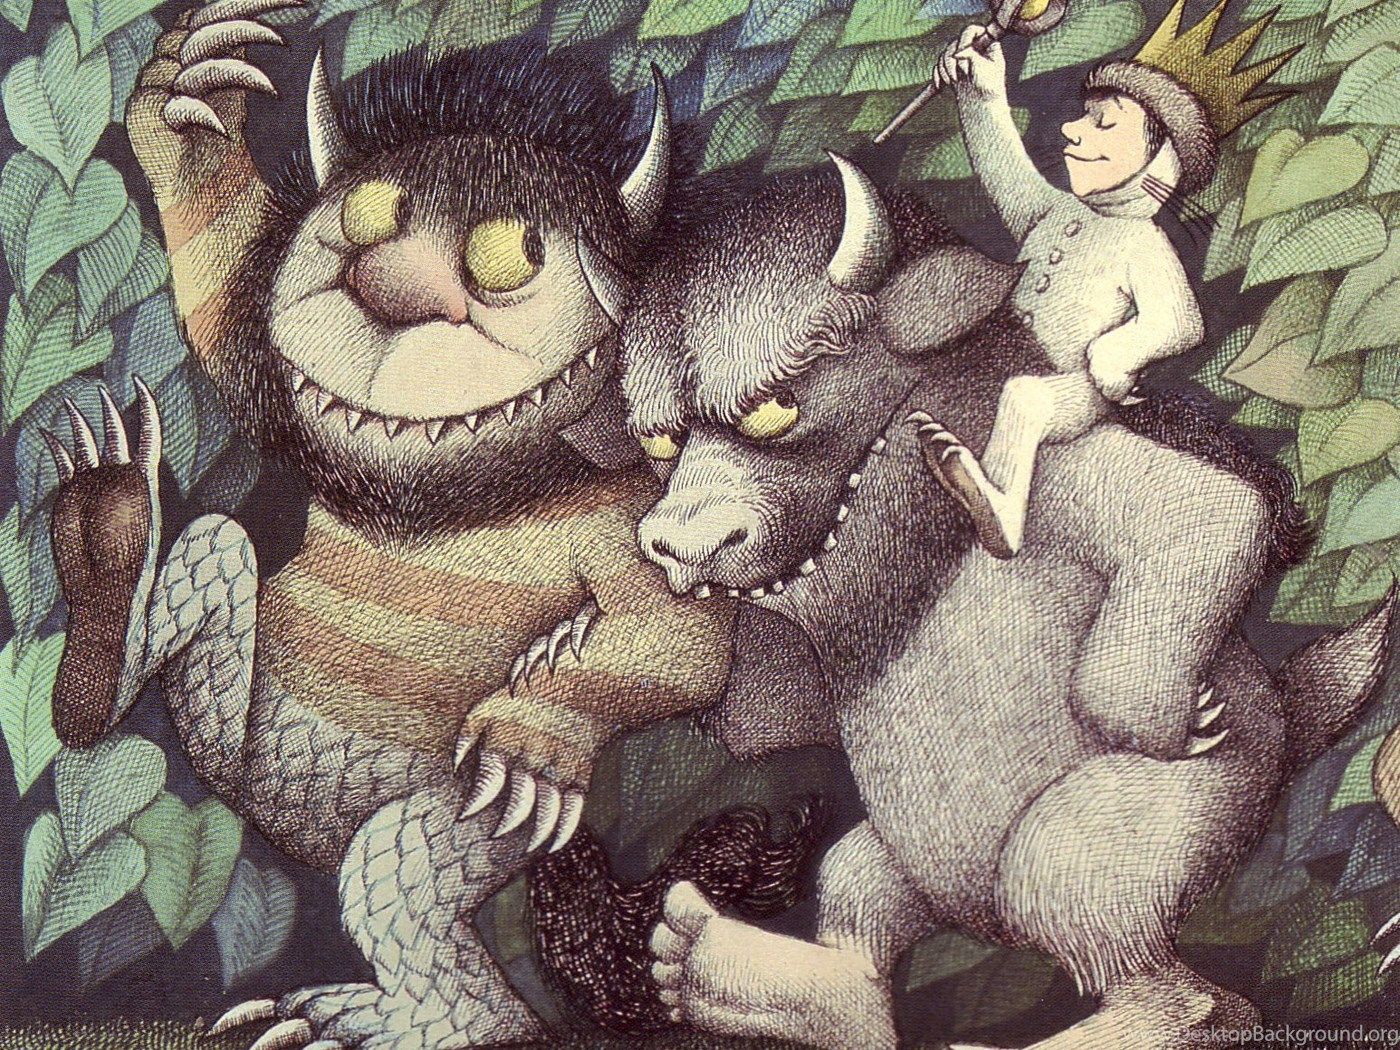 Movies, Books, Where The Wild Things Are wallpaper Desktop Background